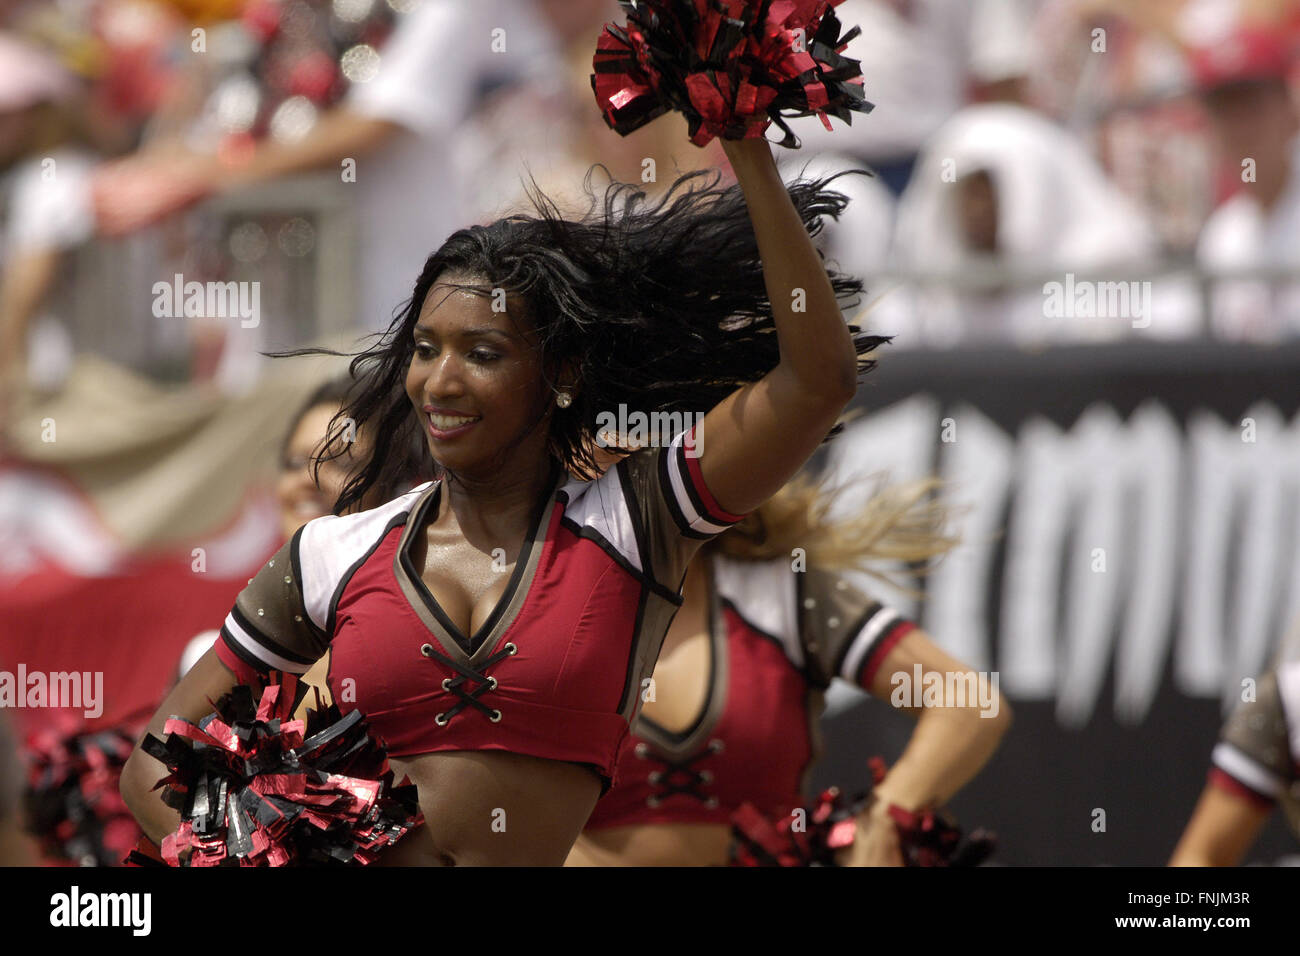 Tampa, Florida, USA. 10th Sep, 2006. Sept. 10, 2006; Tampa, FL, USA; Tampa Bay Buccaneers cheerleaders perform during the Bucs game against the Baltimore Ravens at Raymond James Stadium. ZUMA Press/Scott A. Miller © Scott A. Miller/ZUMA Wire/Alamy Live News Stock Photo